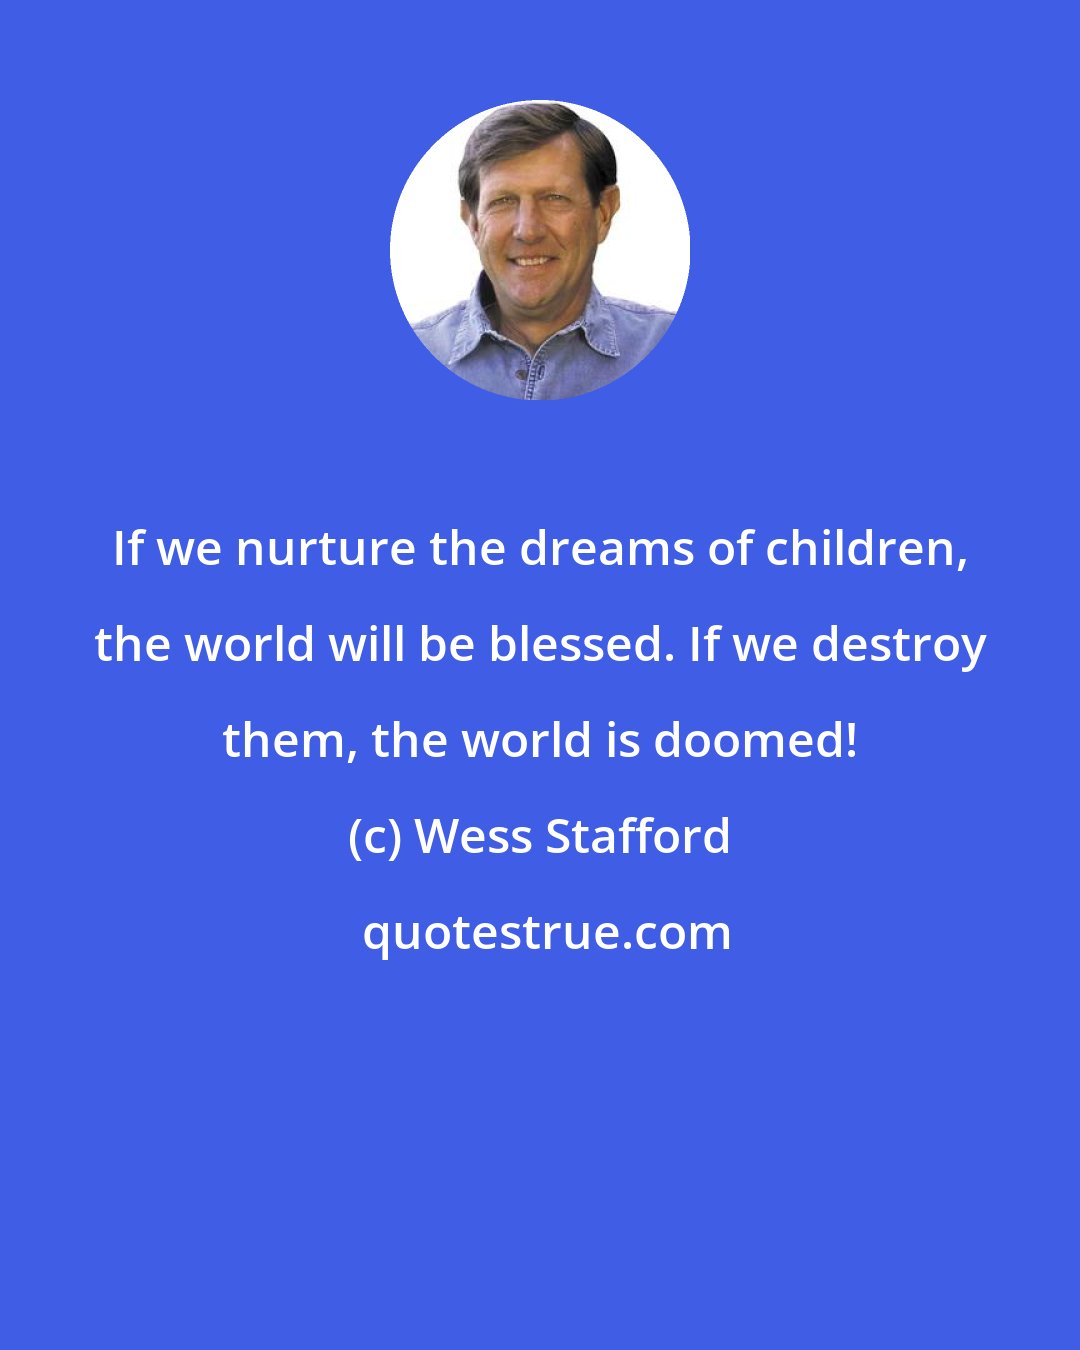 Wess Stafford: If we nurture the dreams of children, the world will be blessed. If we destroy them, the world is doomed!